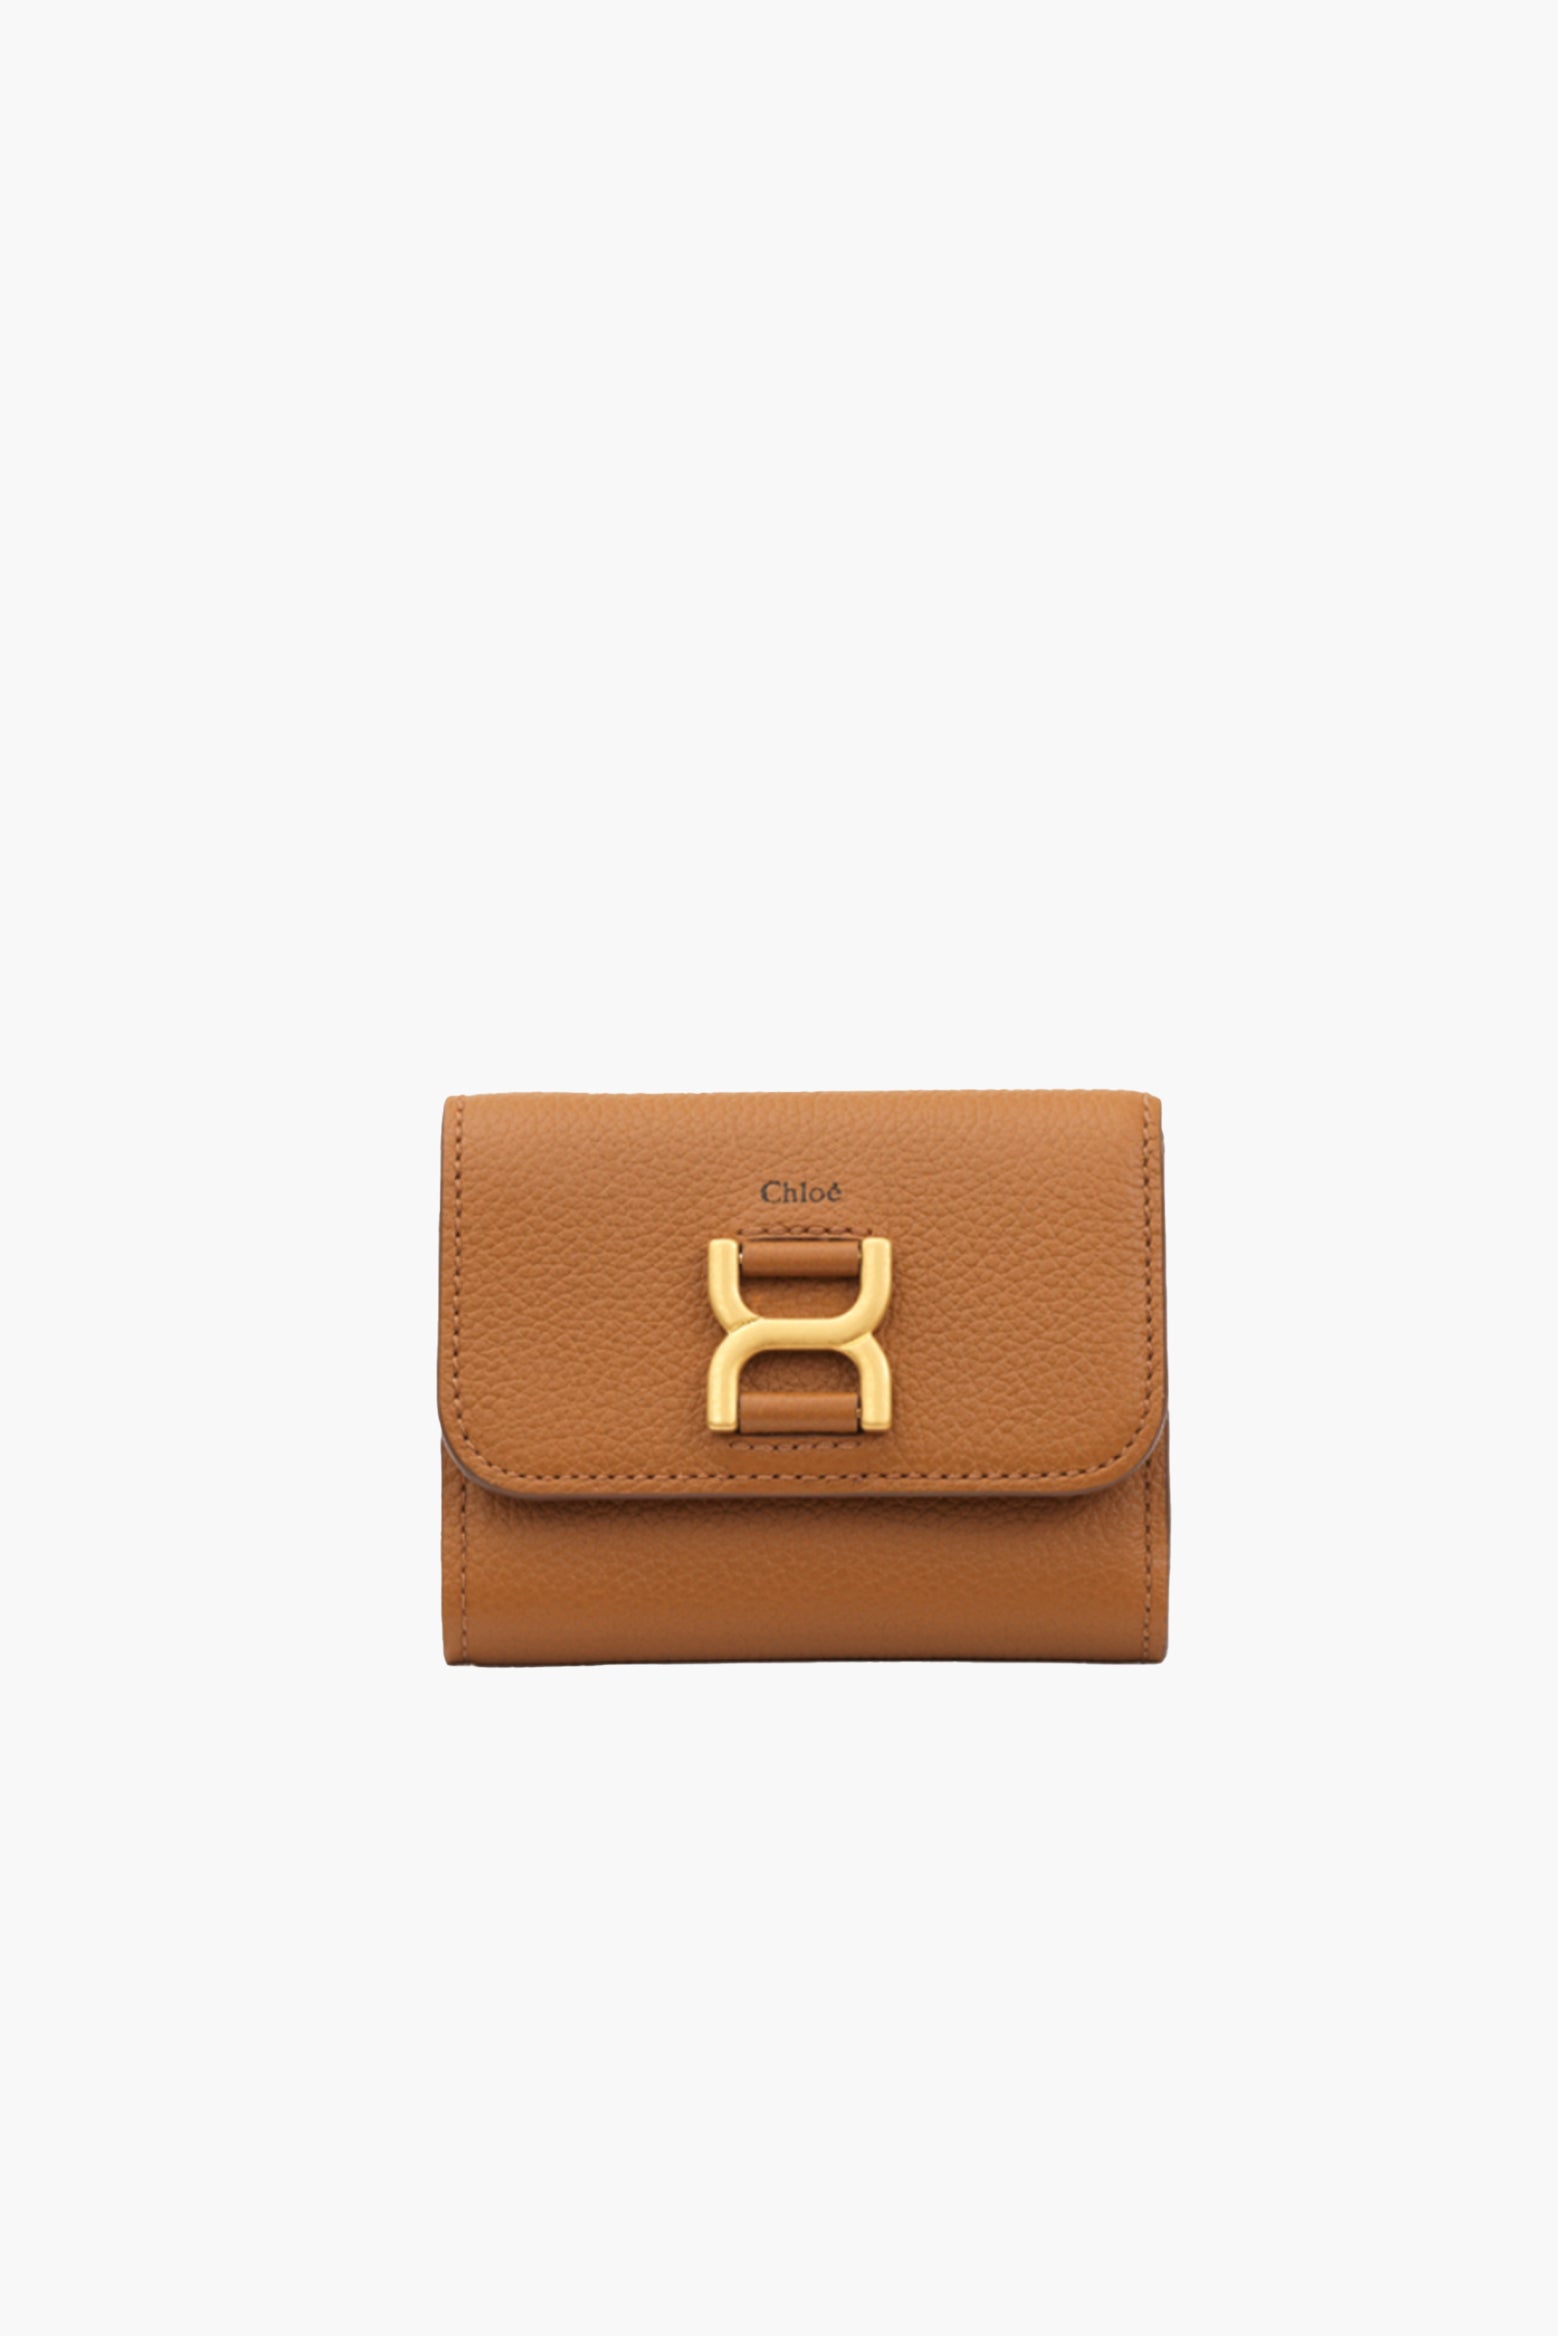 Chloé Marcie Small Trifold in Pottery Brown available at The New Trend Australia.